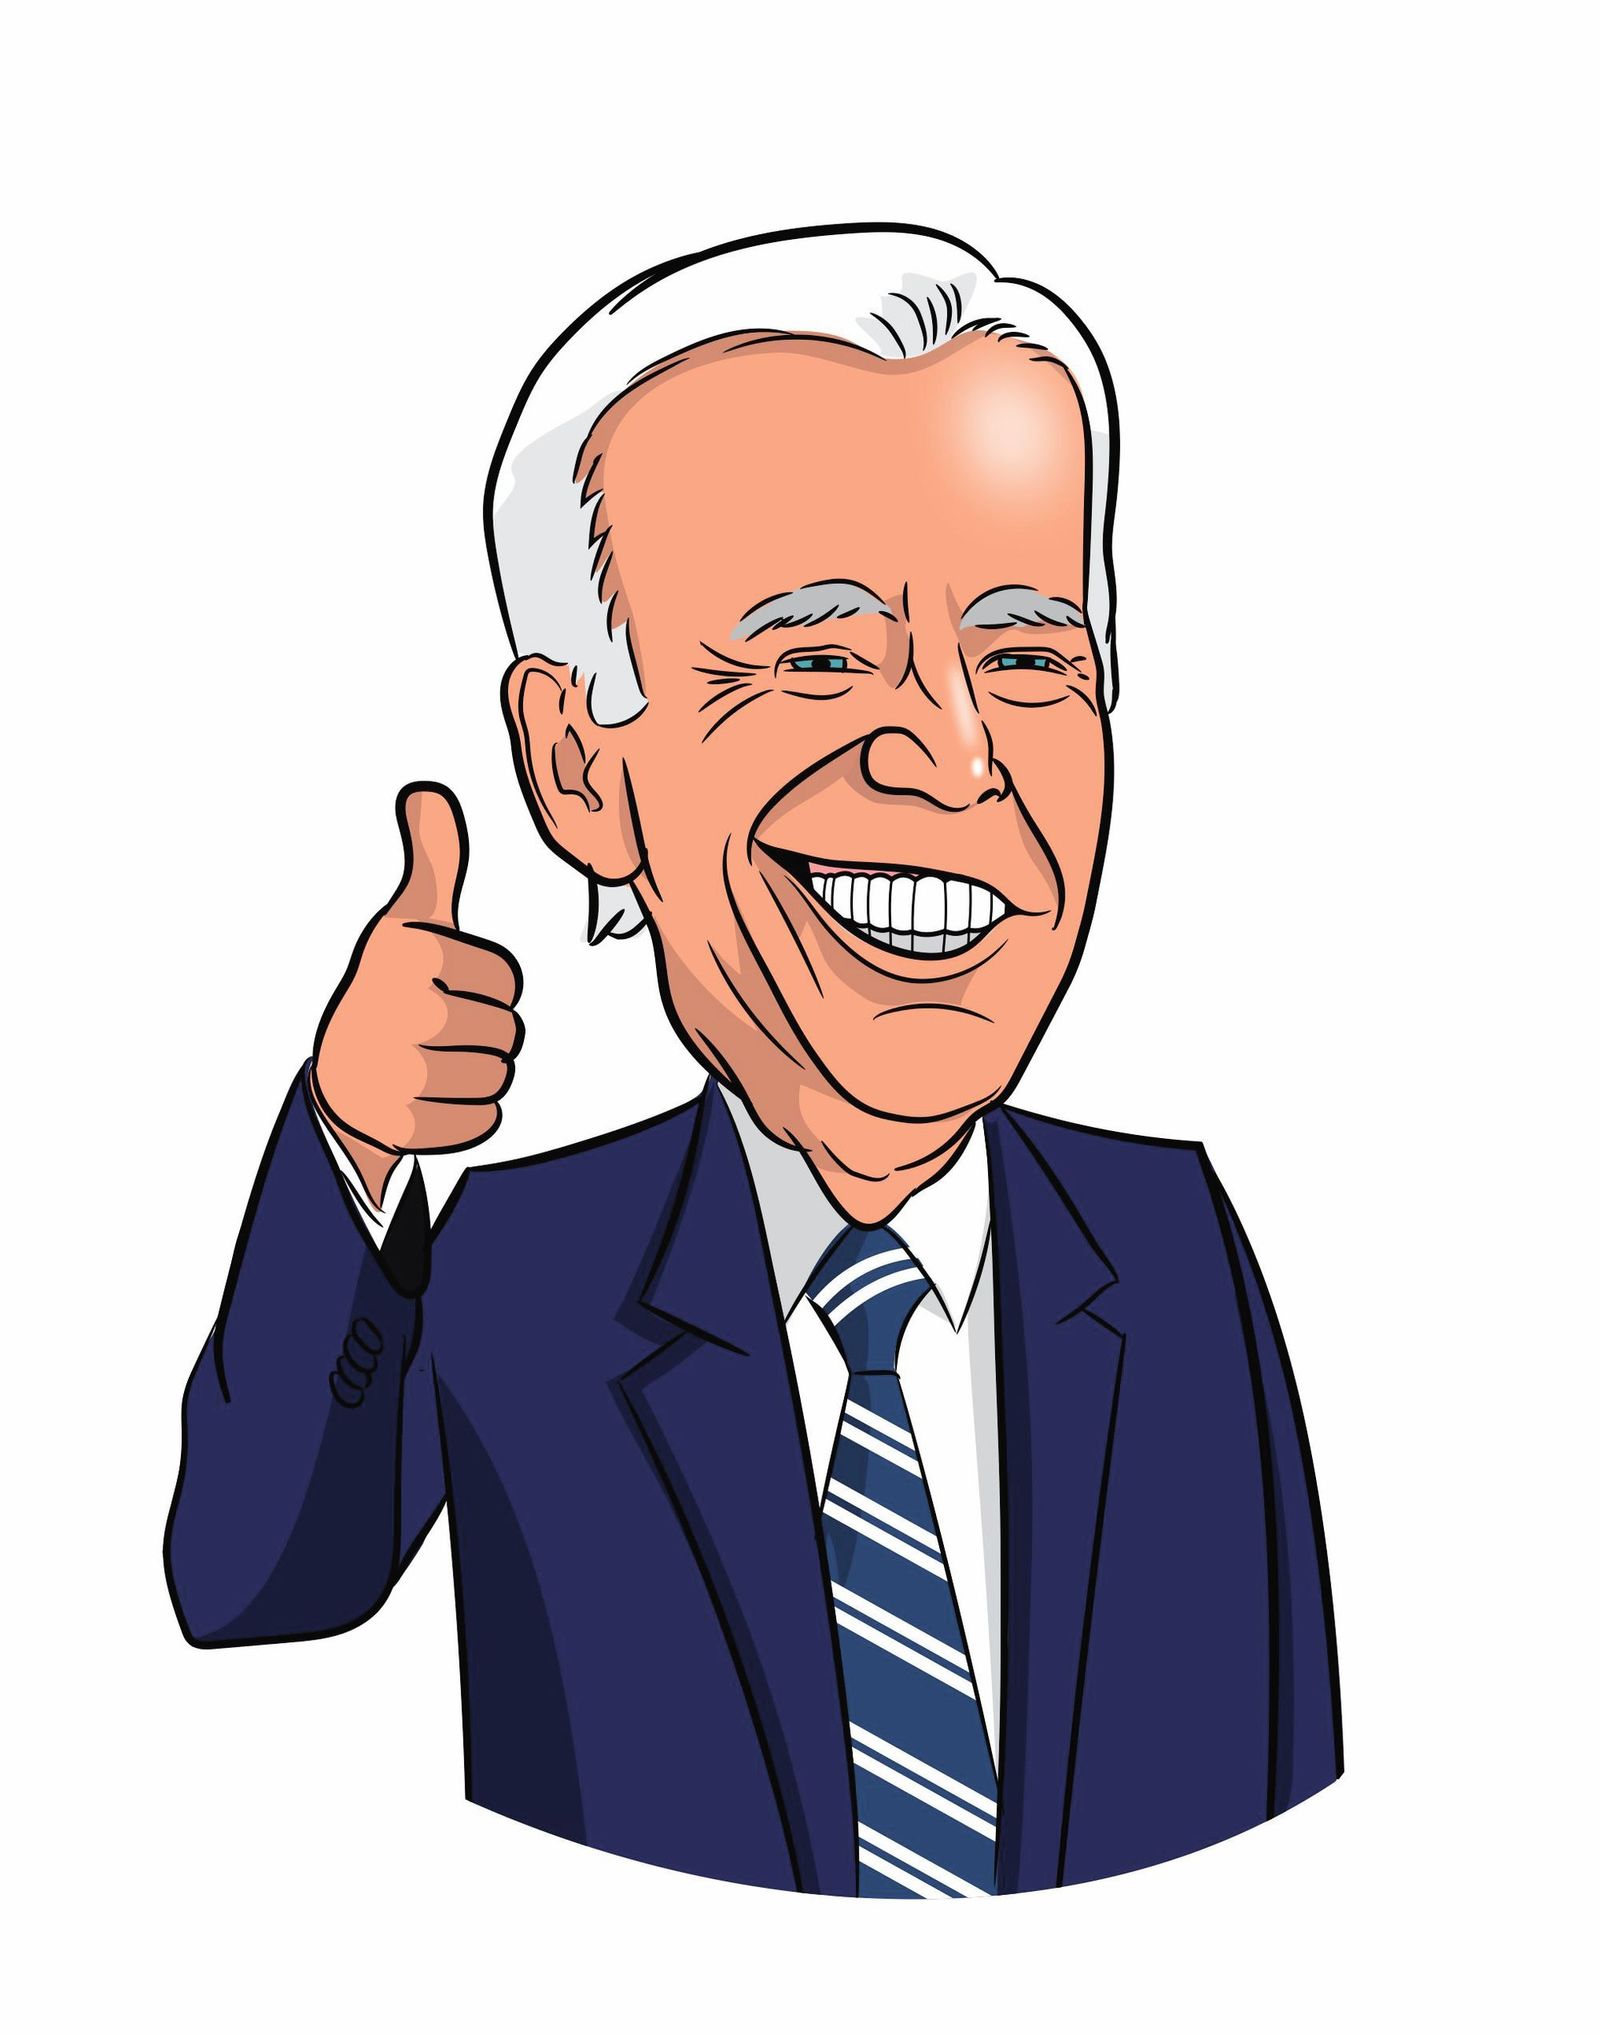 Biden Bounces Back, RIP Queen Elizabeth II, Make Way For Midterms, Alaskan Native Mary Petola in The House, JFK asks Why go to the Moon?